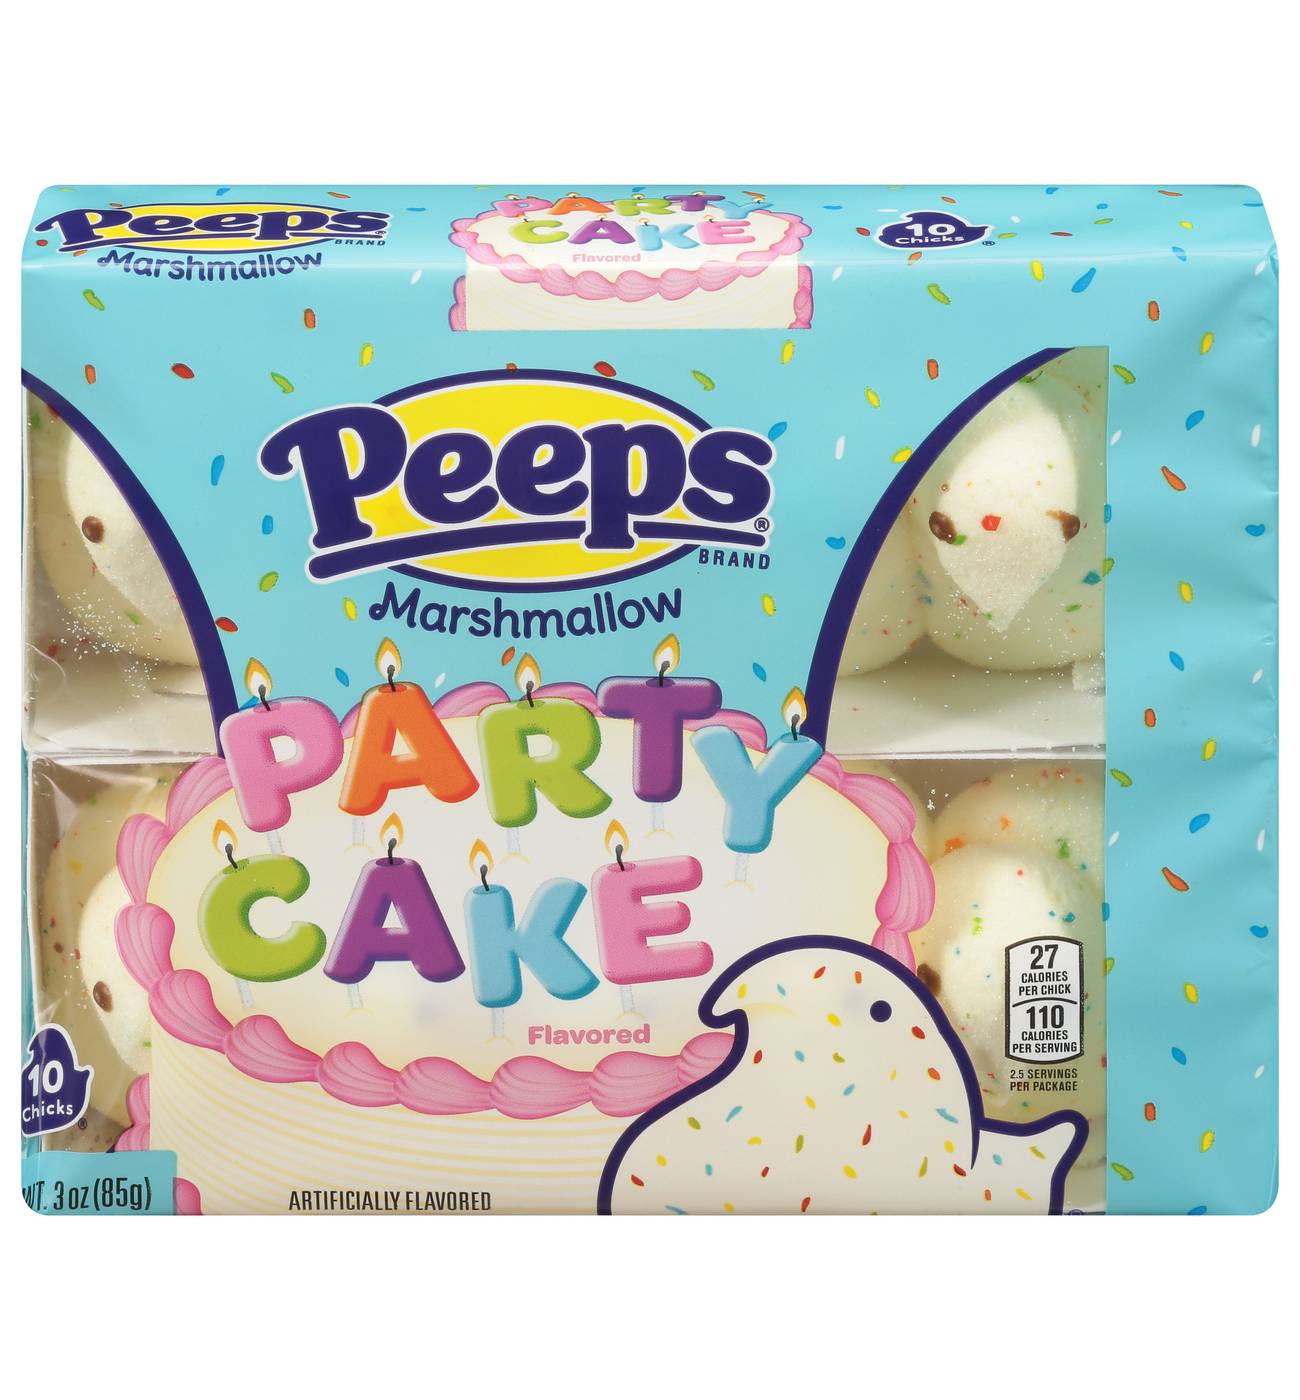 Peeps Party Cake Marshmallow Easter Chicks; image 1 of 2